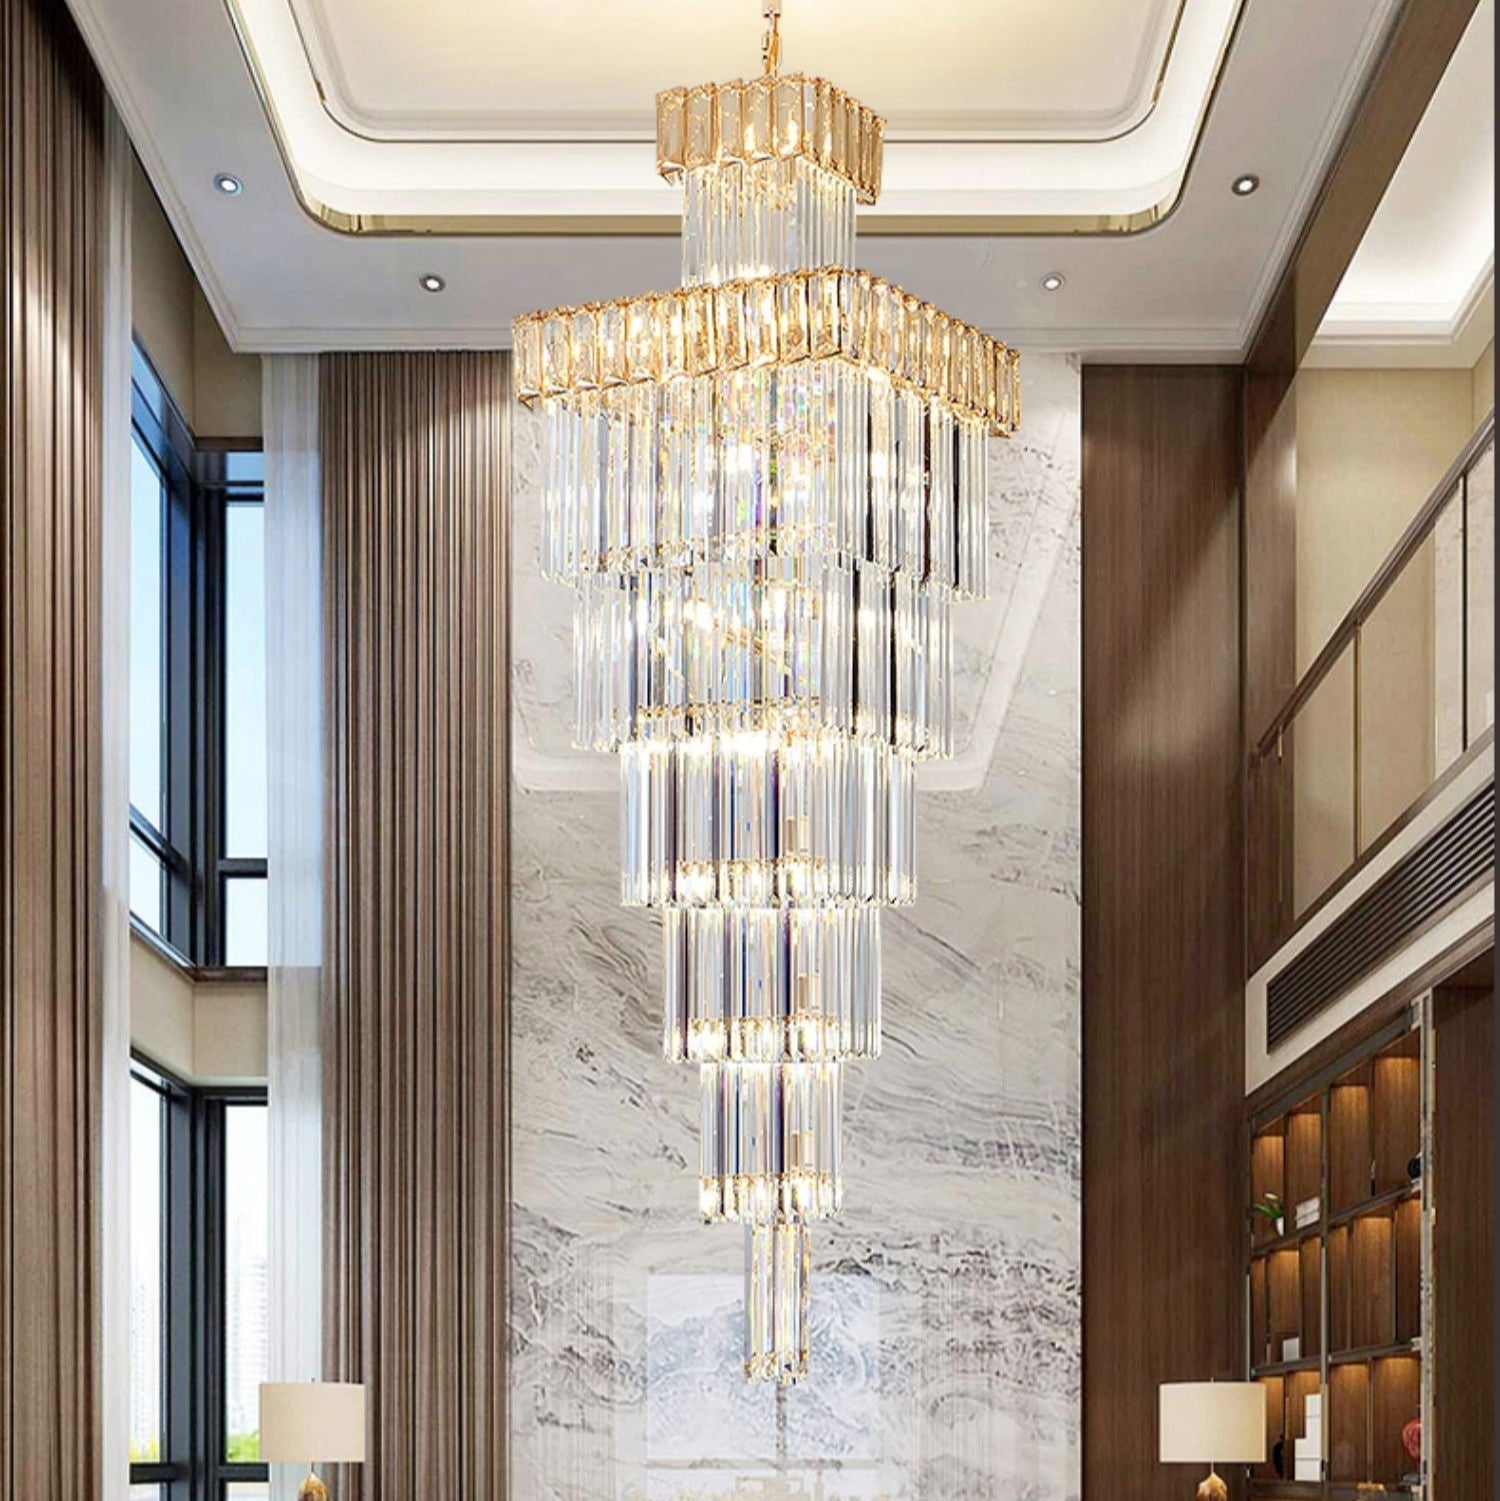 Decorative Large Vertical Crystal Staircase Chandelier Foyer Ceiling Light Fixture Lamp In Gray/ Amber Brim Chandeliers Kevinstudiolives   